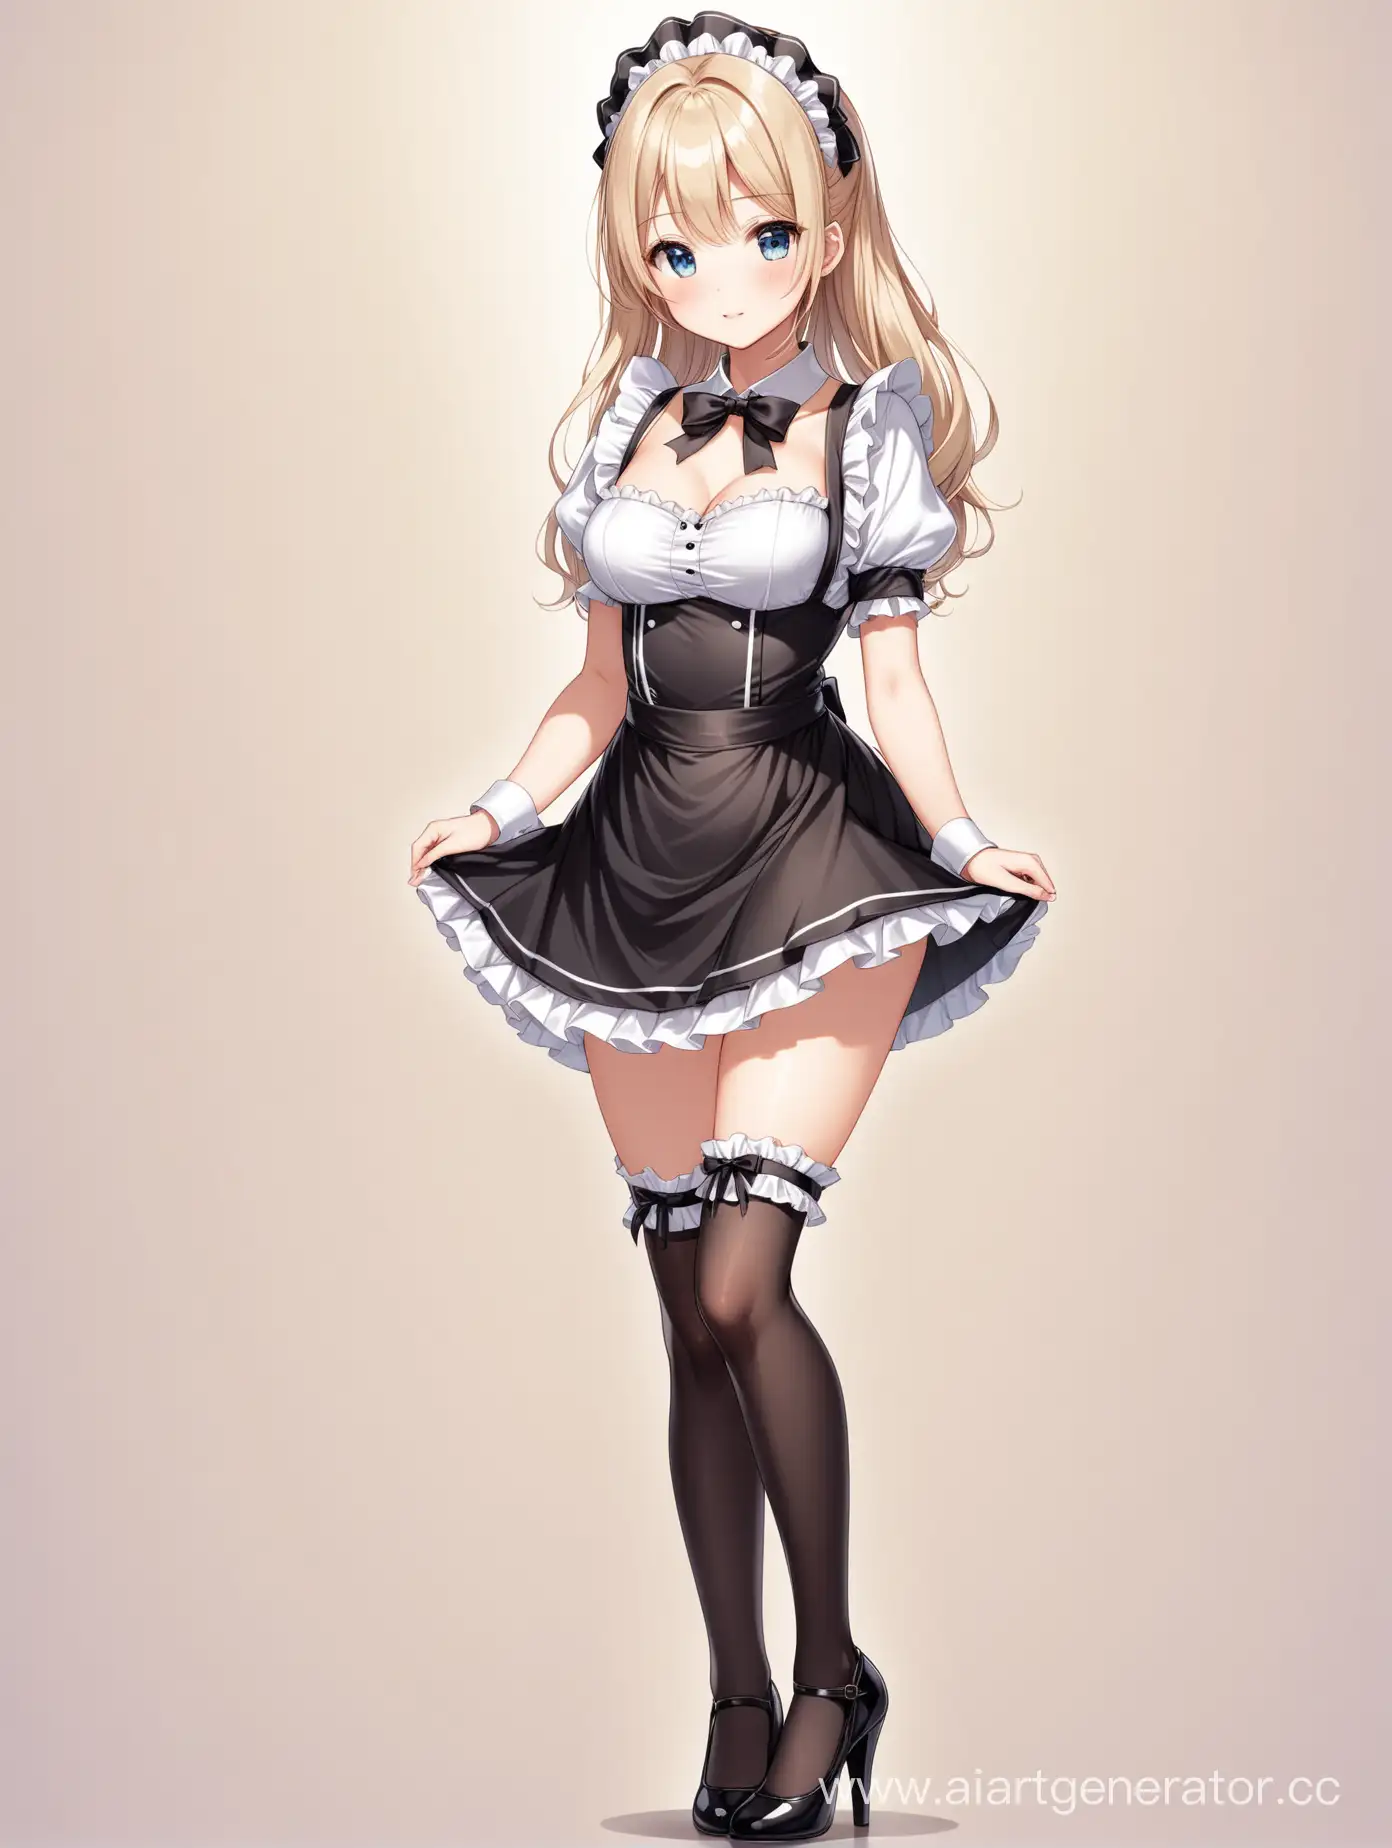 Adorable-Petite-Maid-in-MiniSkirt-and-Stockings-with-High-Heels